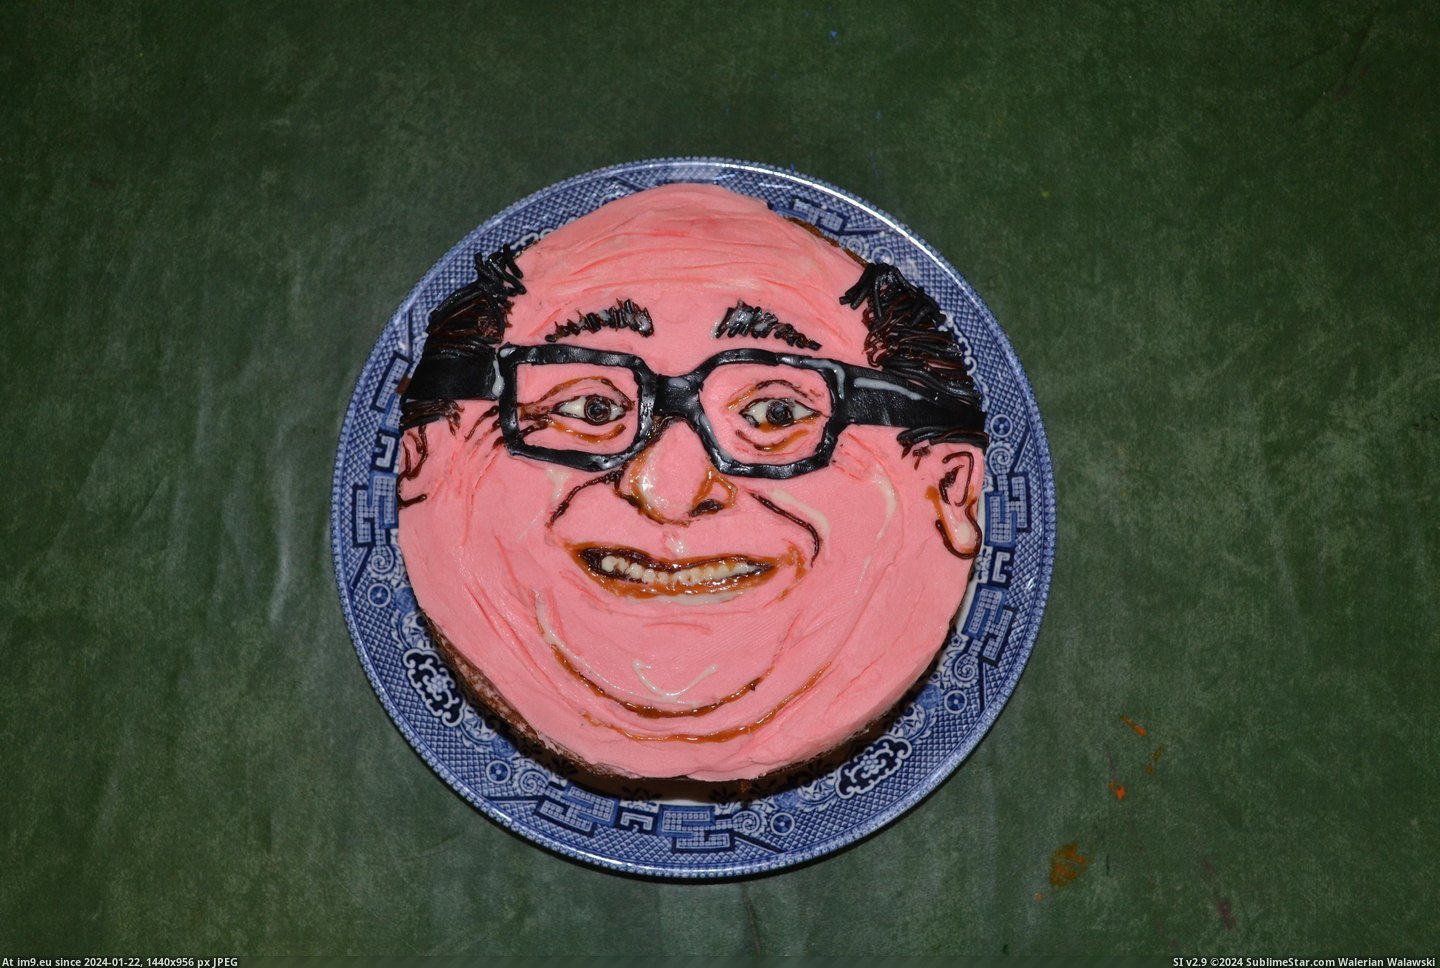 #Face #Sister #Did #Obsession #Danny #Unhealthy #Devito #Cake #Birthday #Asked [Pics] My sister has an unhealthy obsession with Danny DeVito and asked for a birthday cake of his face - I did my best. Pic. (Image of album My r/PICS favs))